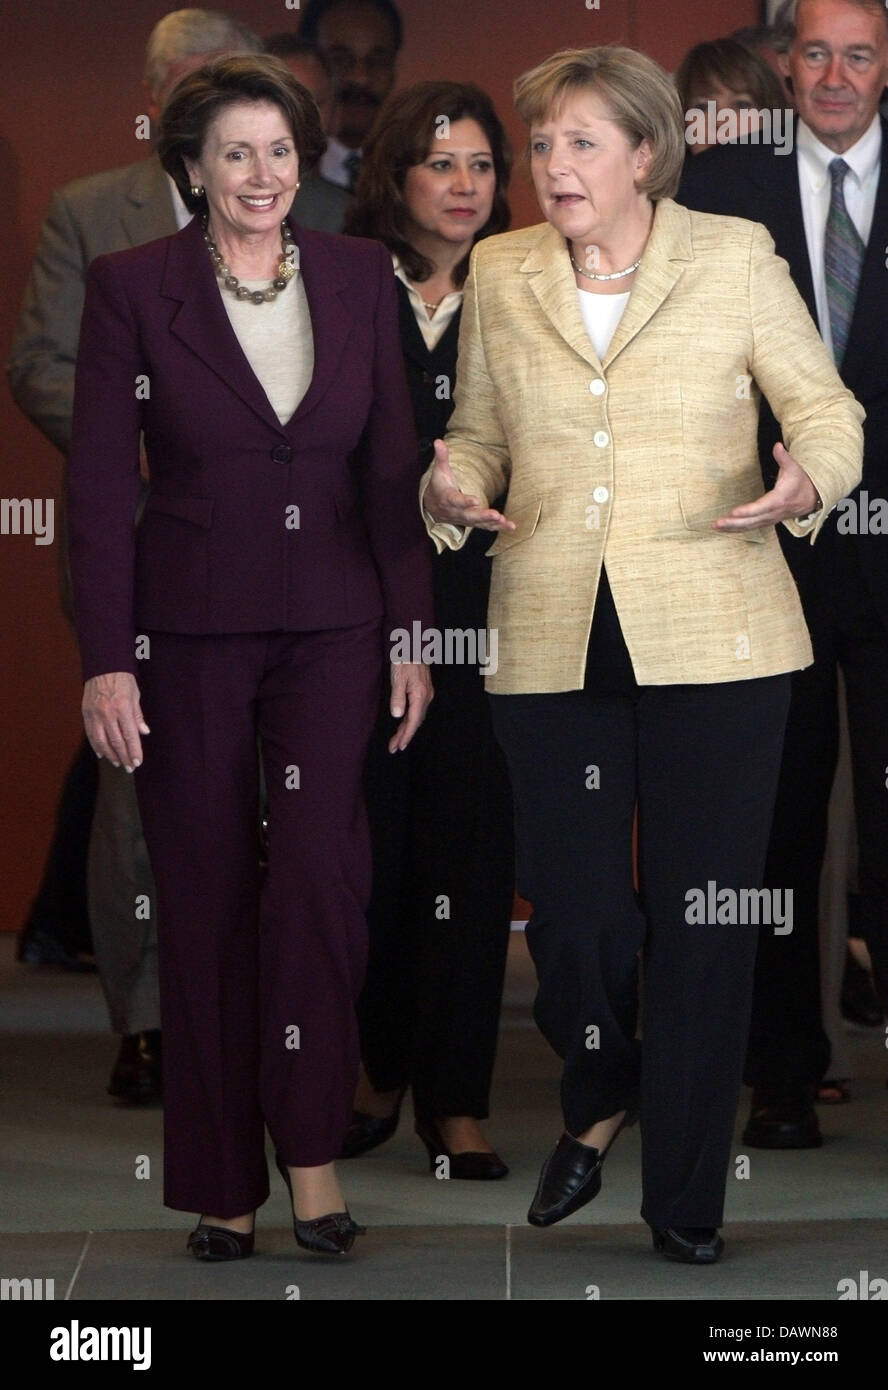 German Chancellor Angela Merkel (R) and Speaker of the US Congress Nancy Pelosi (L) arrive to a give a statement to the press in Berlin, Germany, 29 May 2007. One week before the G8 Summit on 06 to 08 June the meeting is expected to draw a signal on climate protection, a topic that is a major issue between the German and US governments. Pelosi is of the oppositional Democrats. Phot Stock Photo